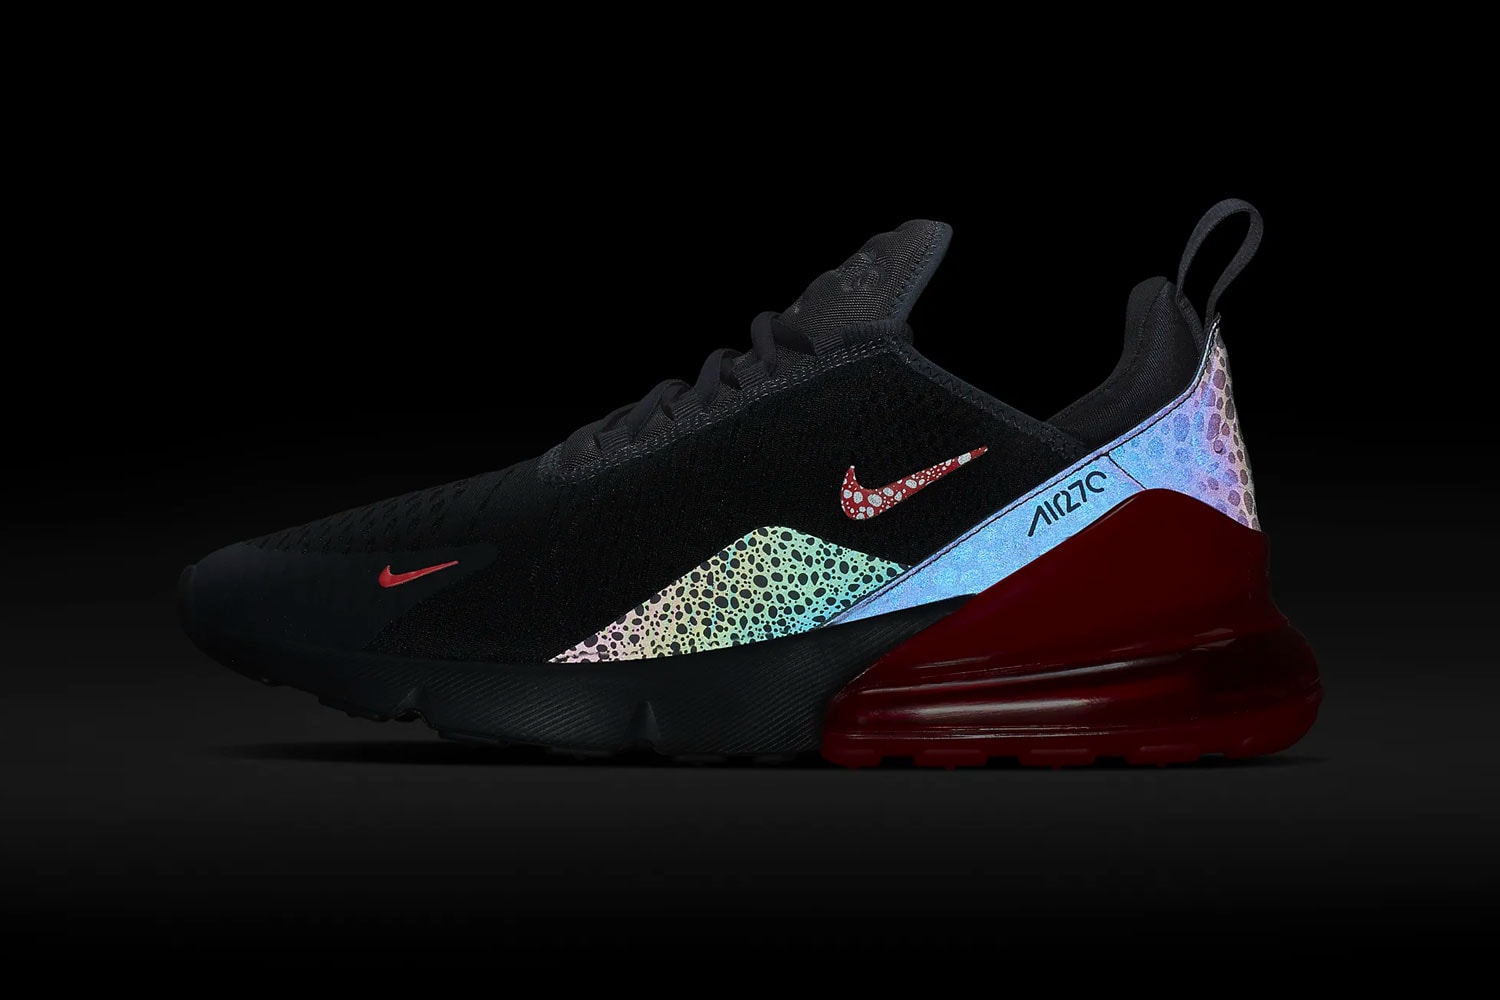 Nike Air Max 270 Reflective Black Red Release Info Date 